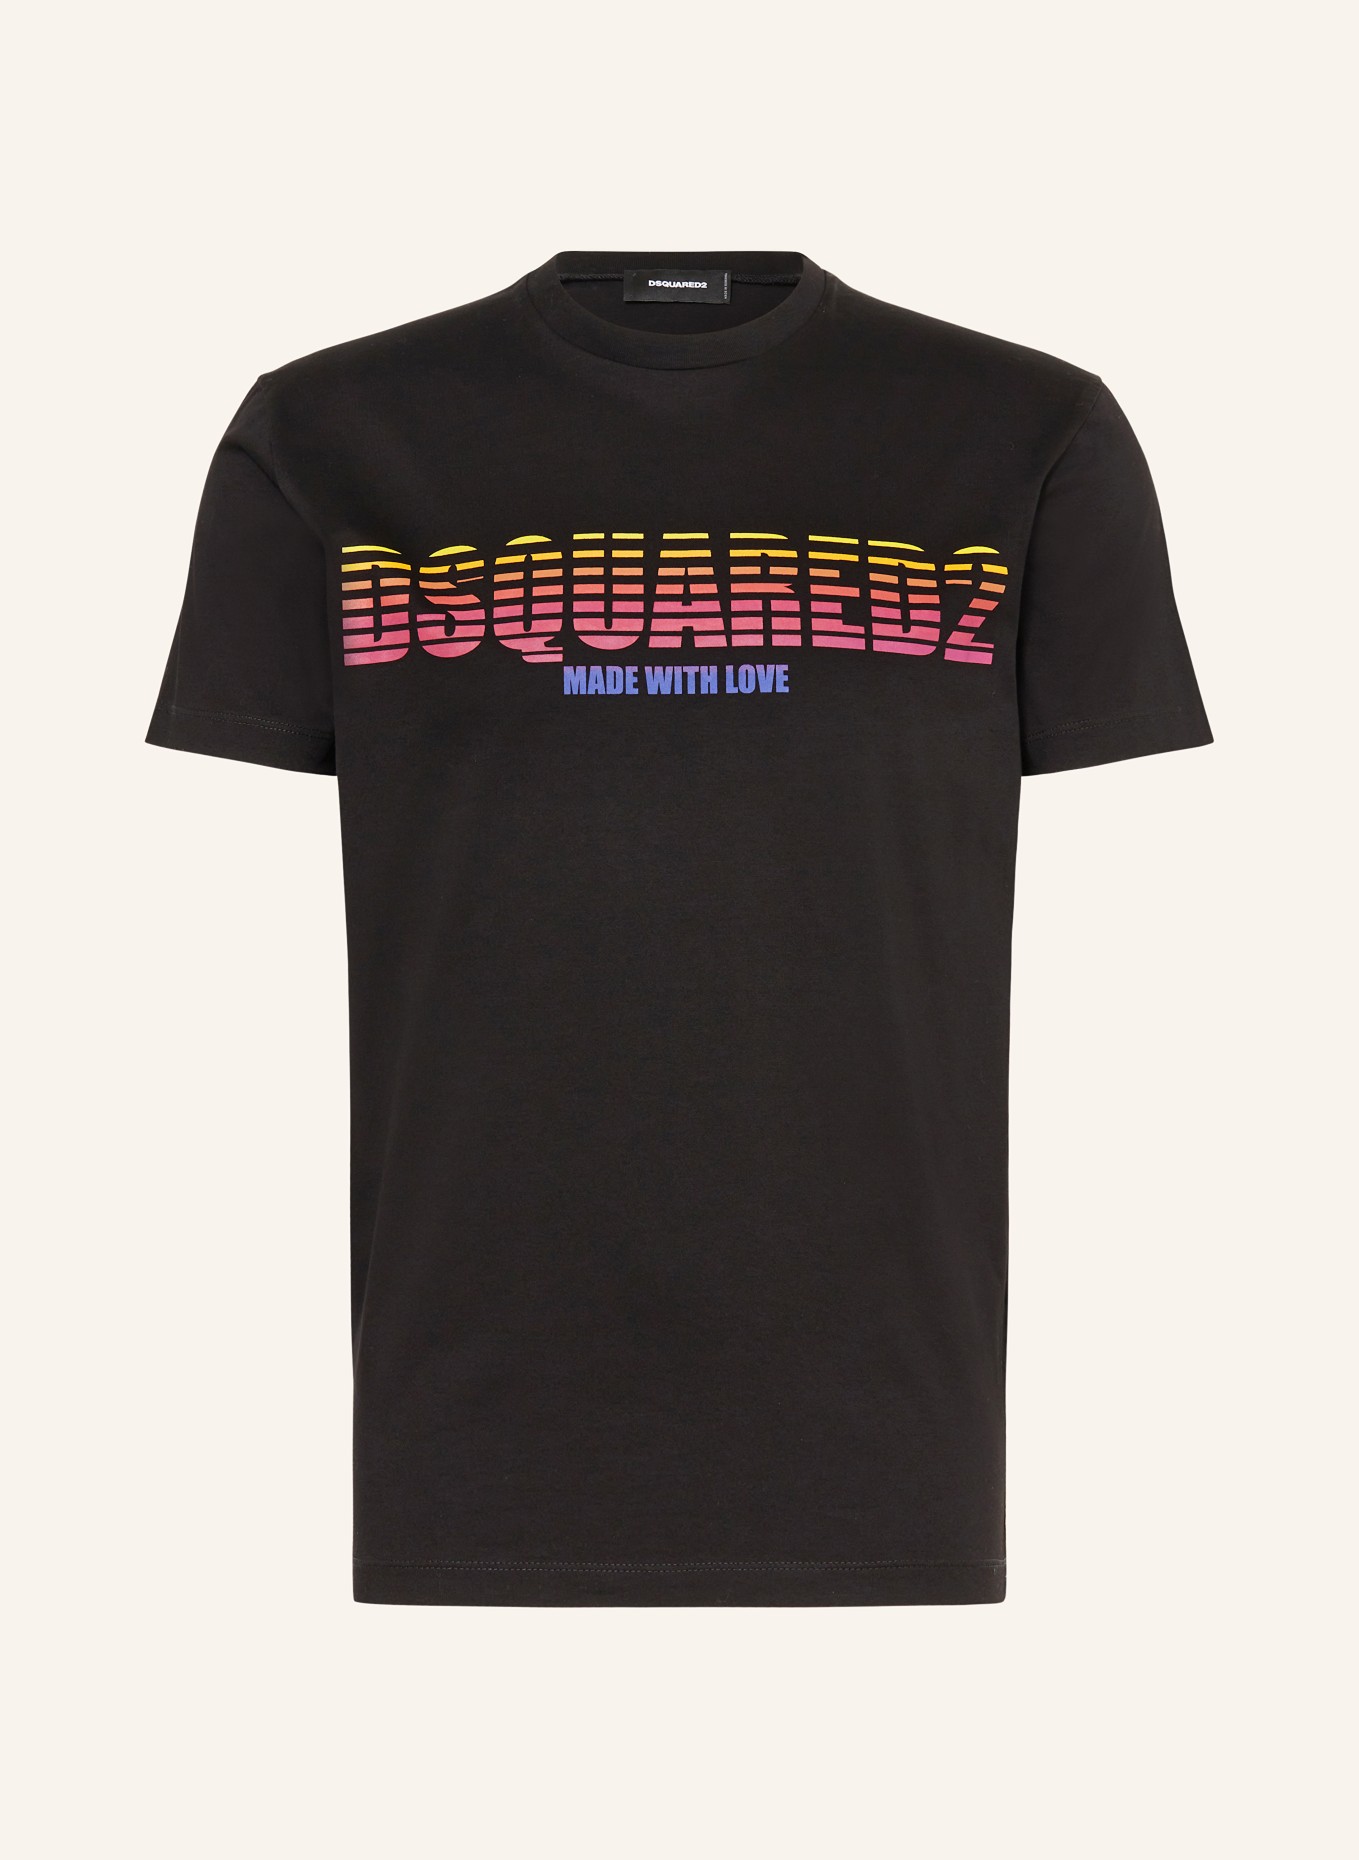 DSQUARED2 T-Shirt COOL FIT DS2 MADE WITH LOVE, Farbe: SCHWARZ (Bild 1)